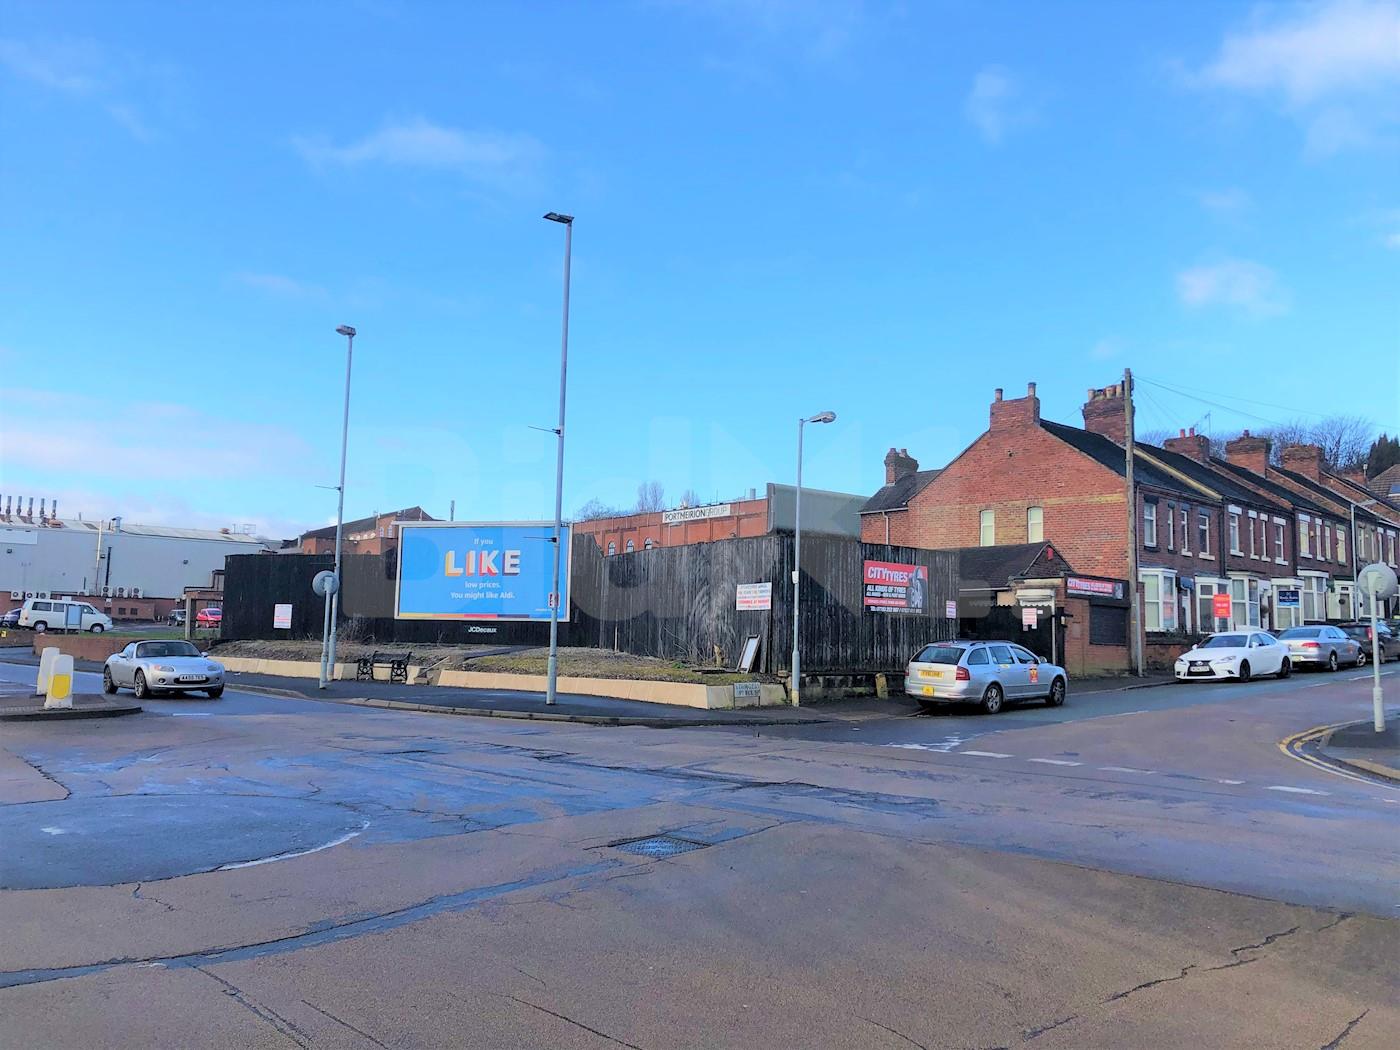 Land at the corner with London Road/Sturgess Street, Stoke on Trent, ST4 7QH 1/4